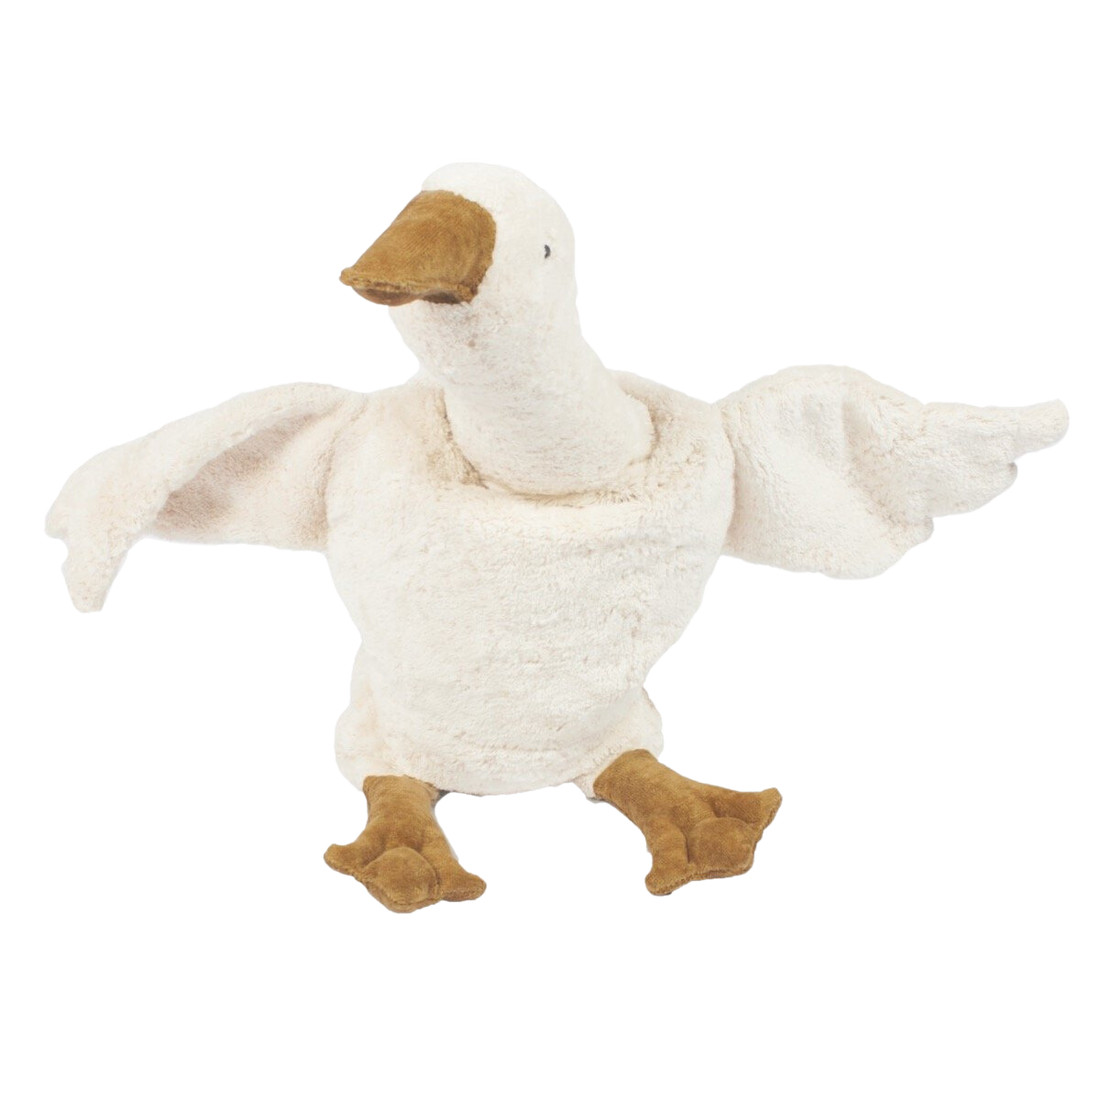 Cuddly Goose Small White